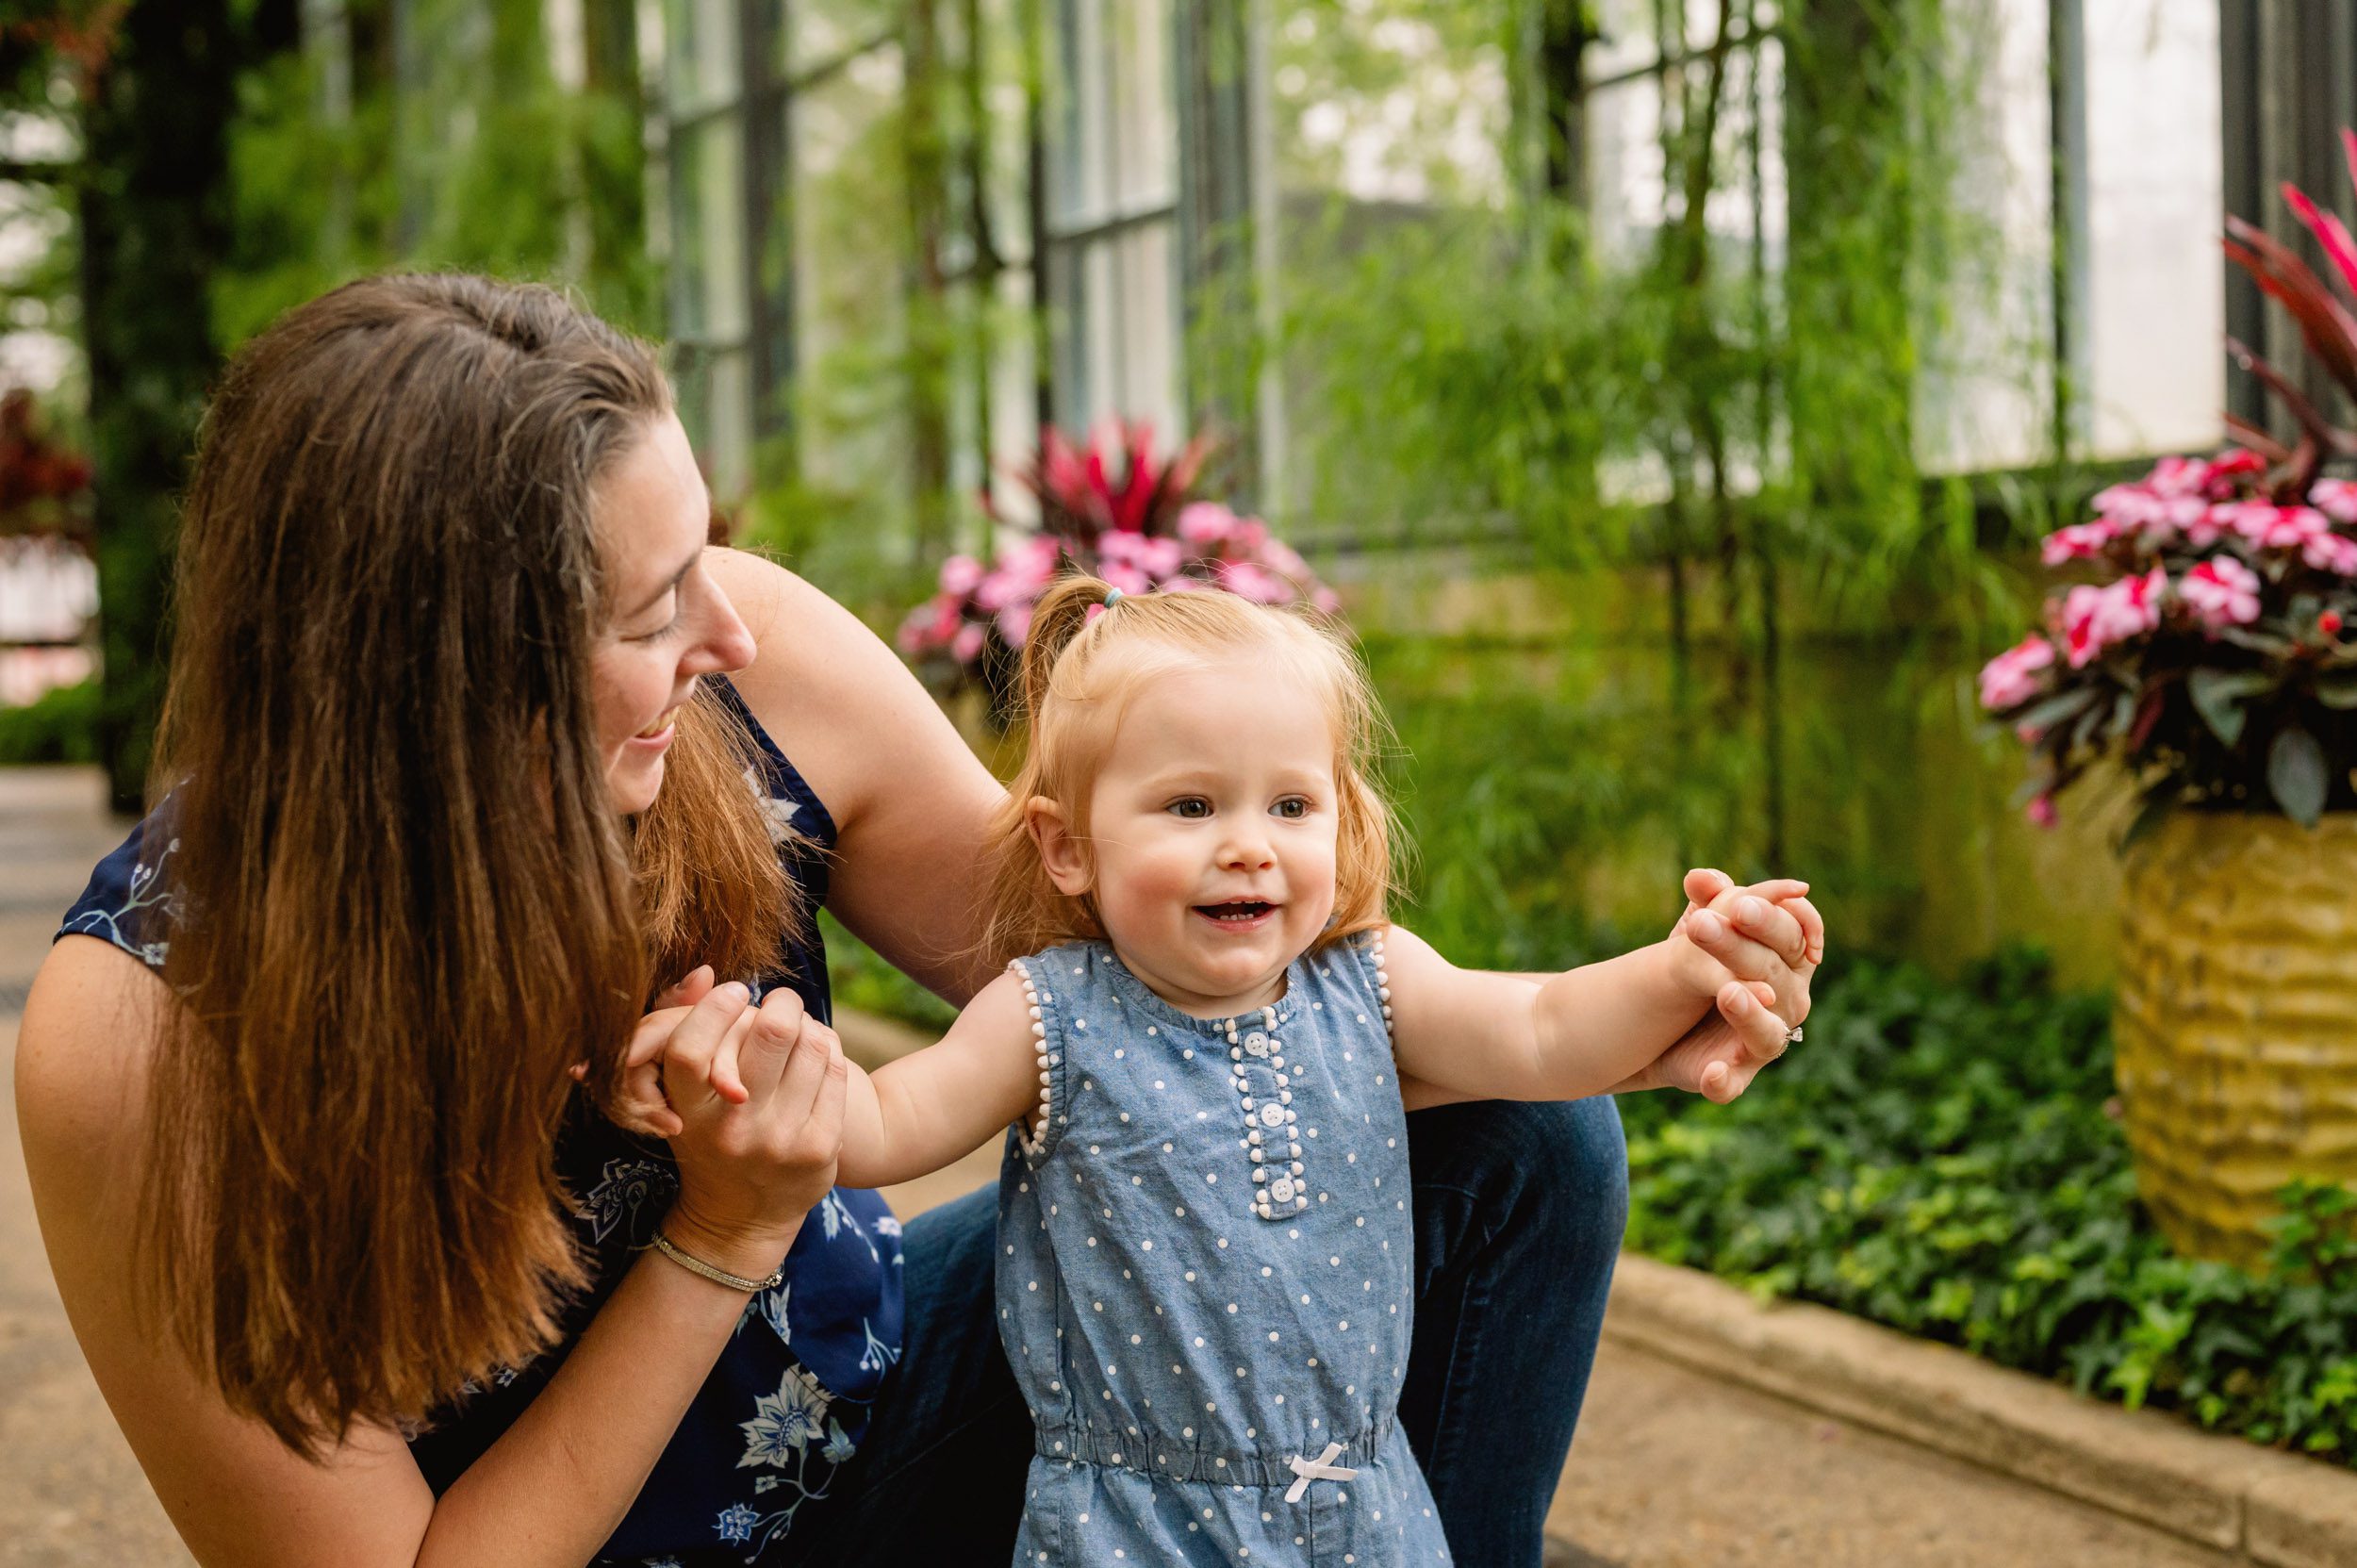 a mom kneeling down in a greenhouse and both holding her daughter's hands as she smiles at her during a fmaily photoshoot